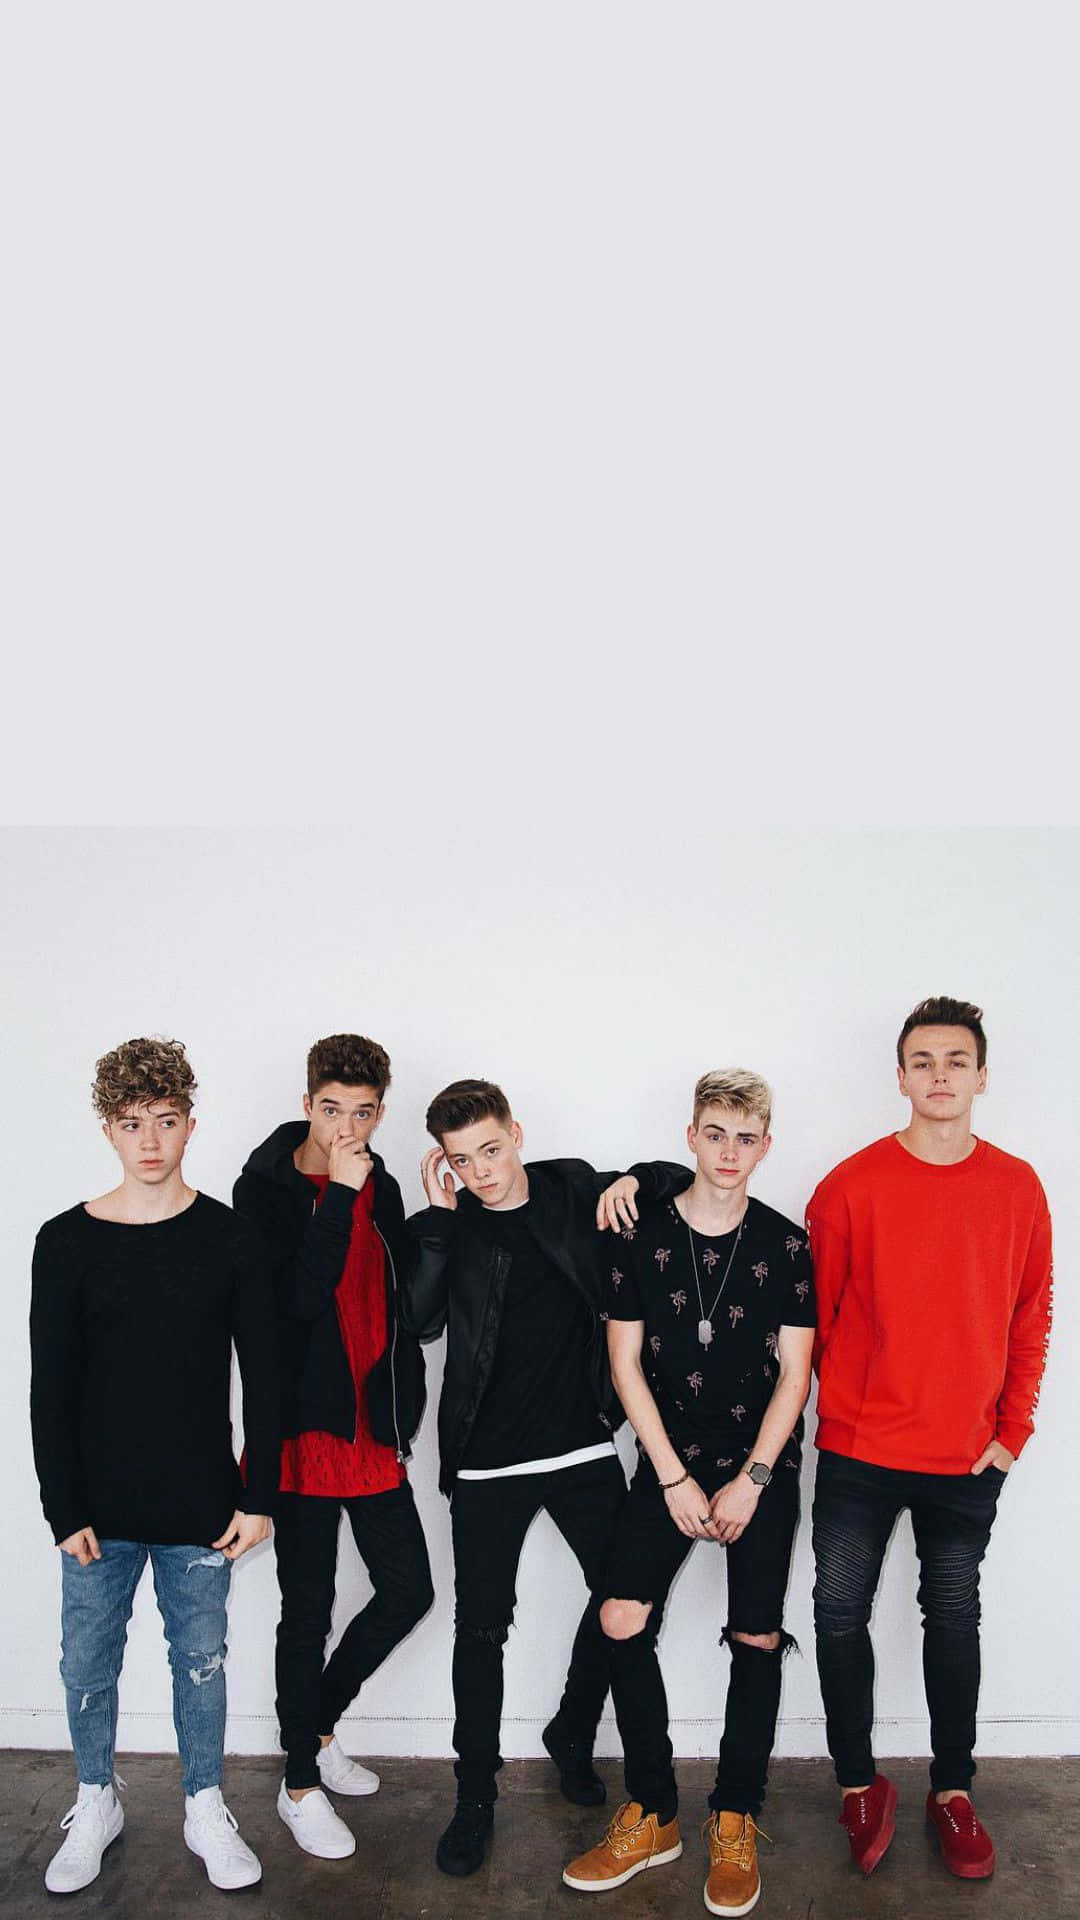 American Boy Band Why Don't We Against A White Wall Wallpaper